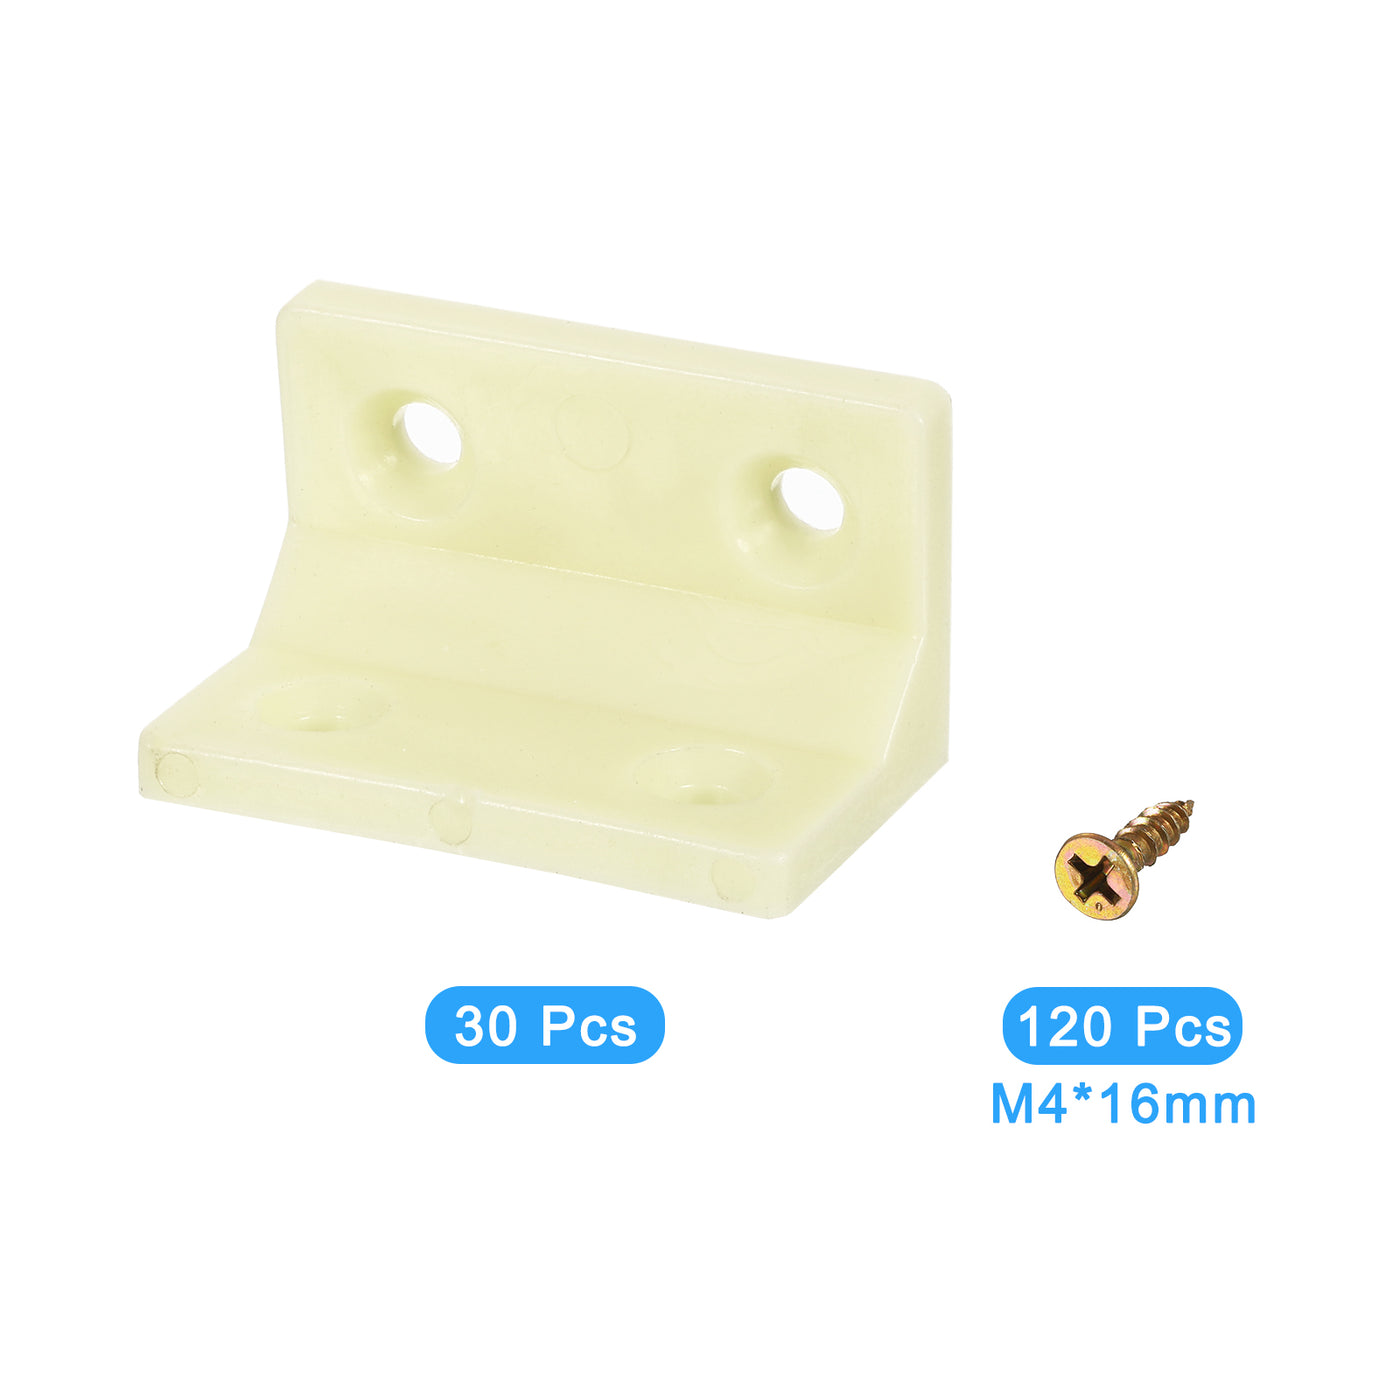 uxcell Uxcell 30Pcs 90 Degree Plastic Corner Braces, 38x22x22mm Nylon Shelf Right Angle Brackets with Screws for Cabinets, Cupboards (Beige Yellow)